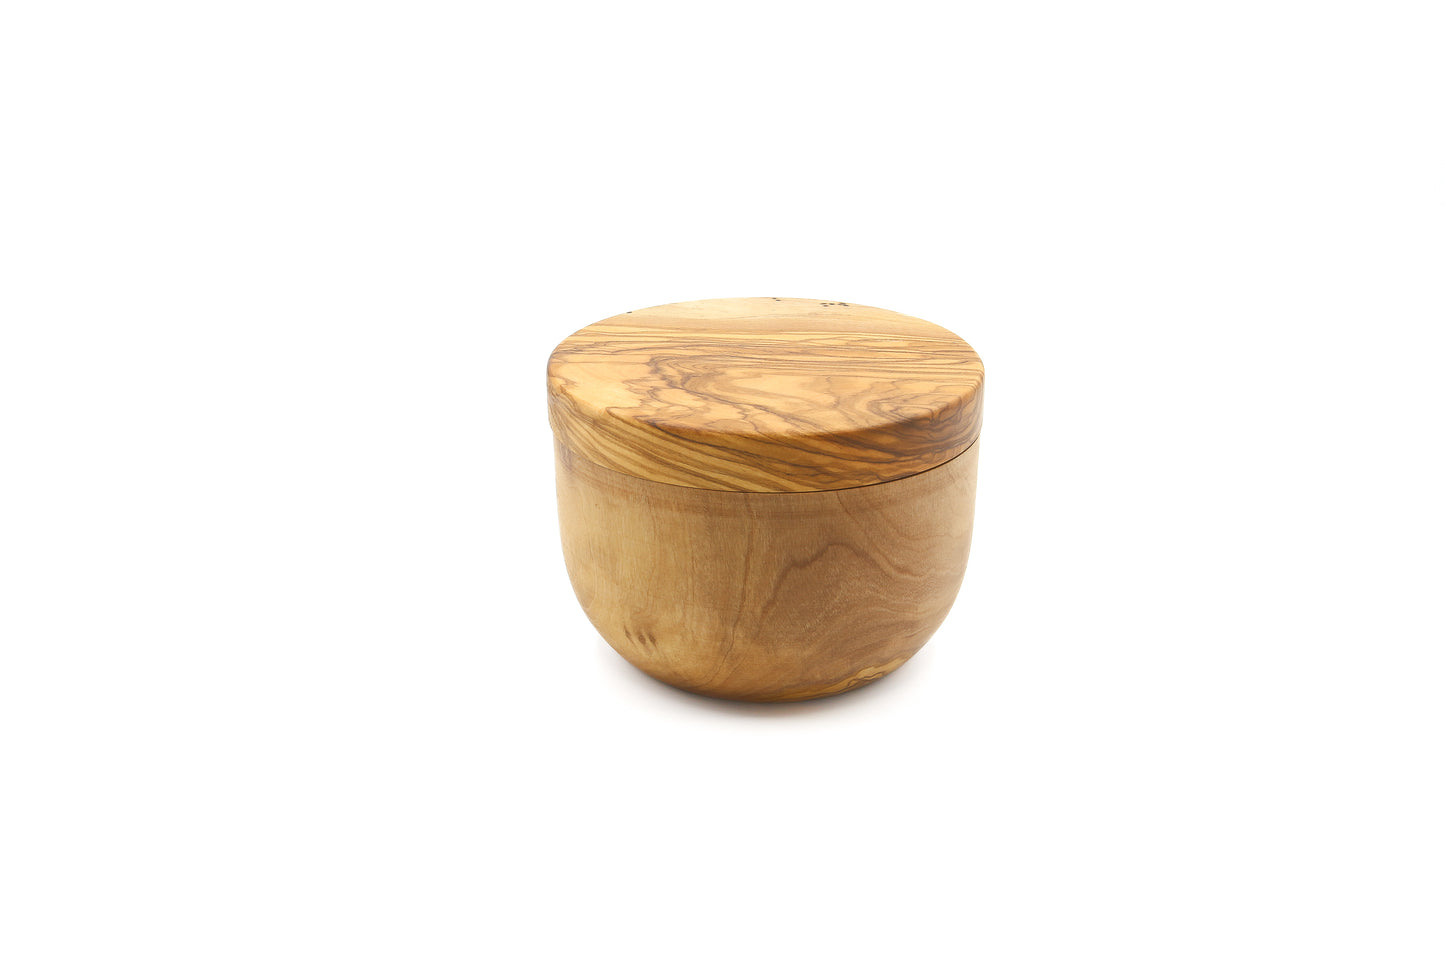 Unique olive wood kitchen accessory for storing seasonings